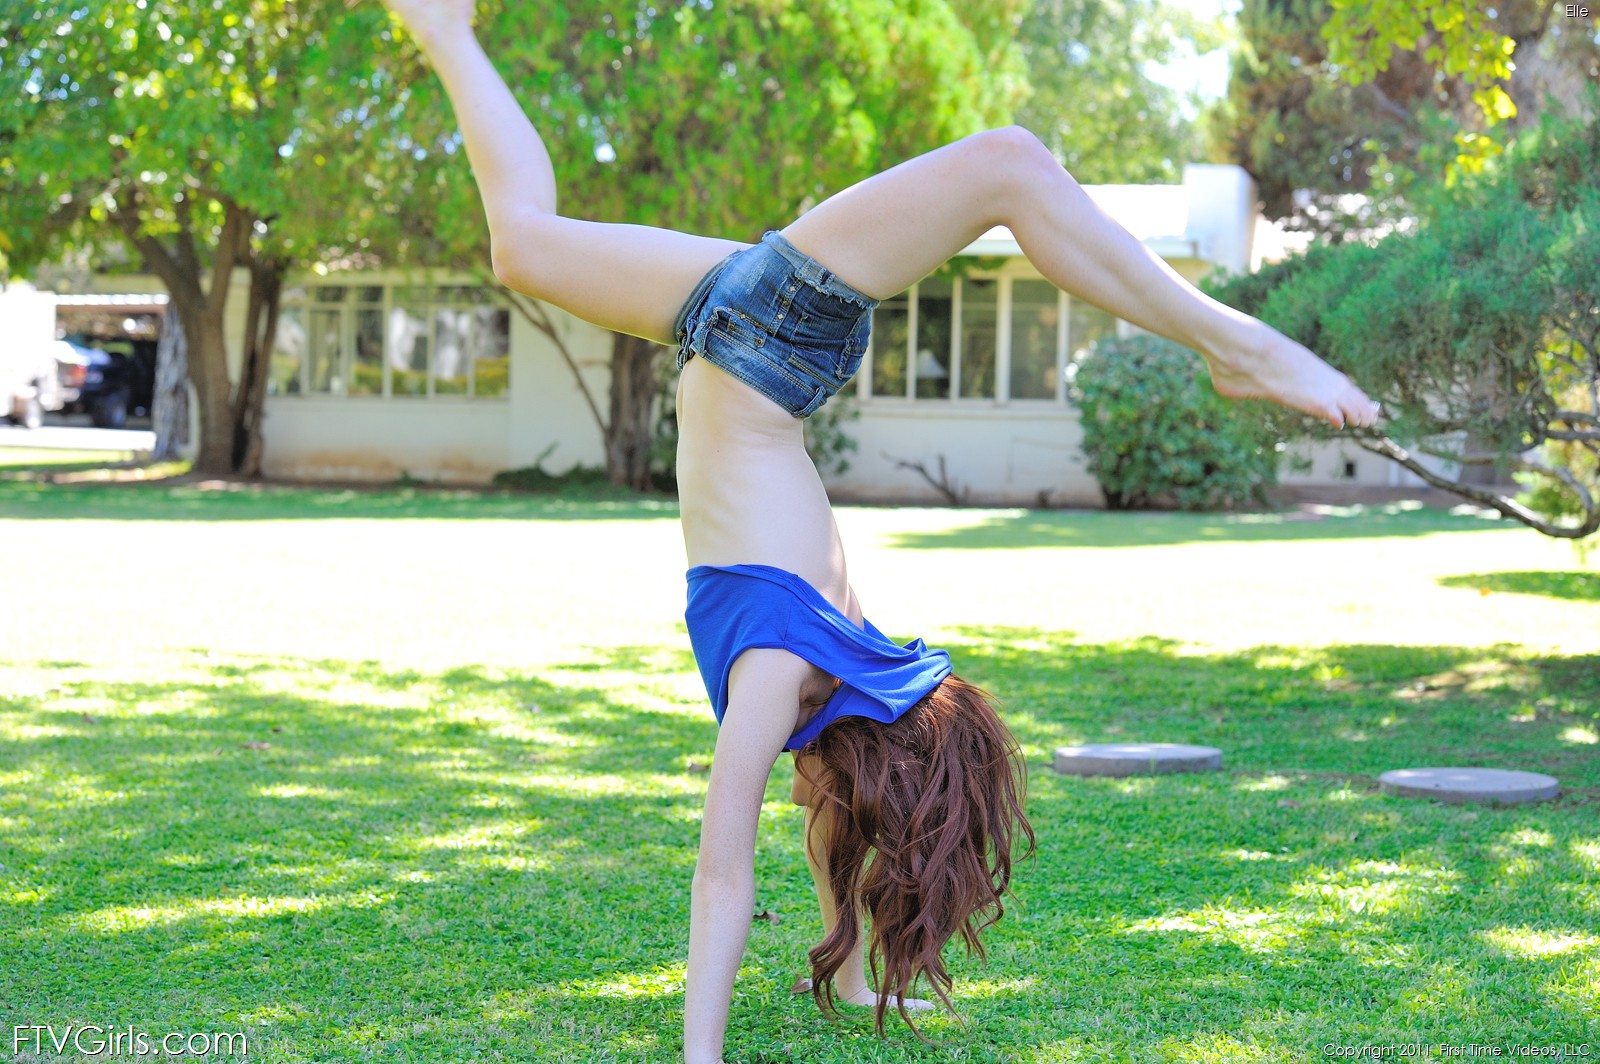 Elle Alexandra in Redheads have more fun - Flexible One photo 61 of 82